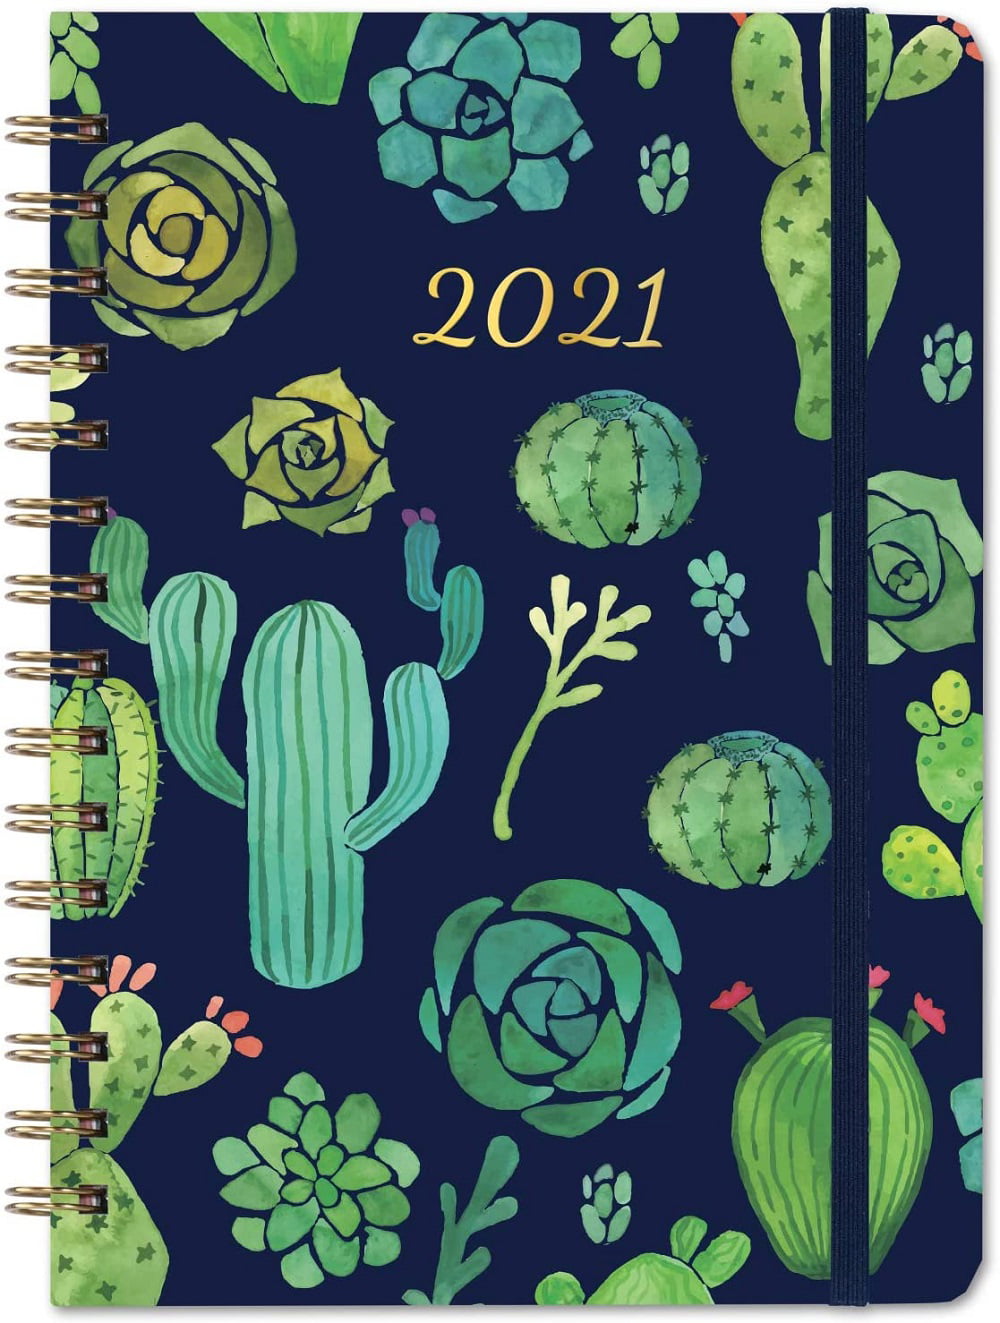 Jan 2021 Planner Weekly & Monthly Planner with Tabs 2021 - Dec 6.3" x 8.4" 